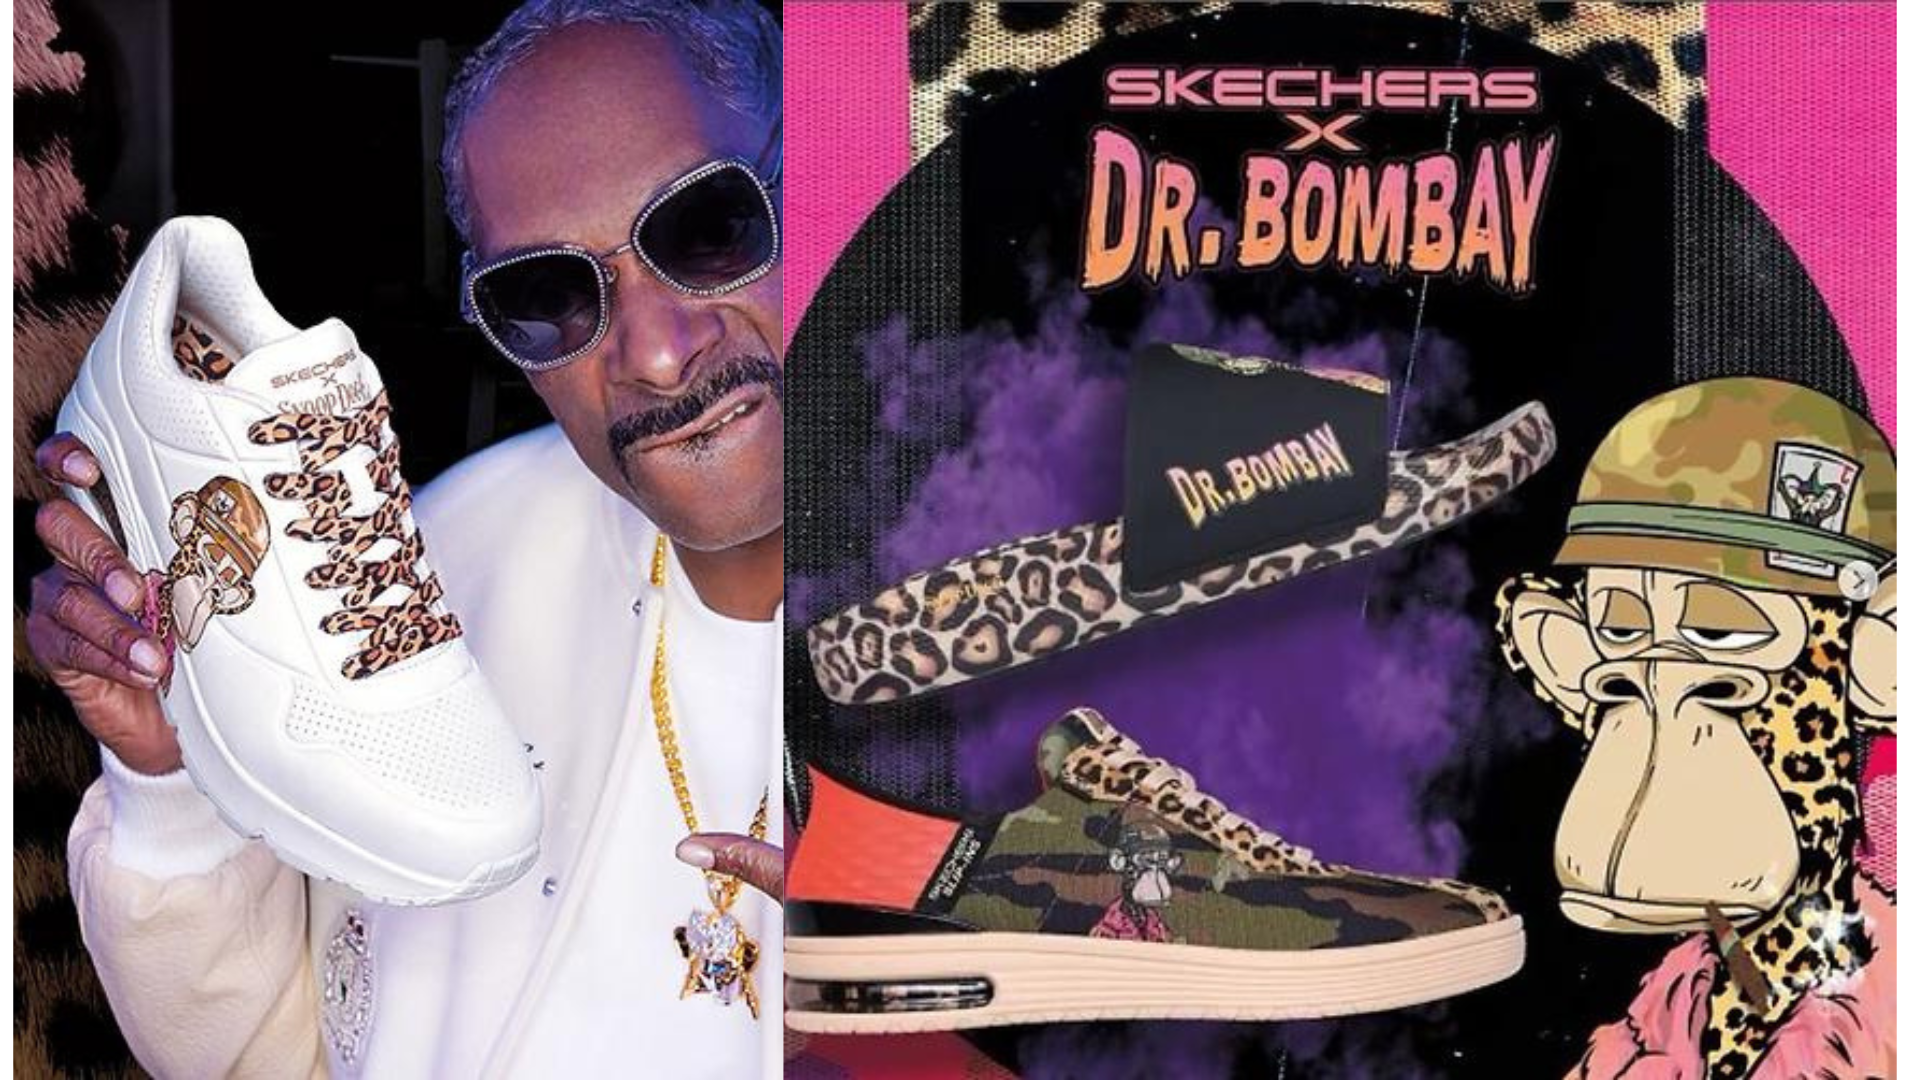 Snoop Dogg & his Bored Ape shoe line Dr. Bombay in collaboration with Skechers